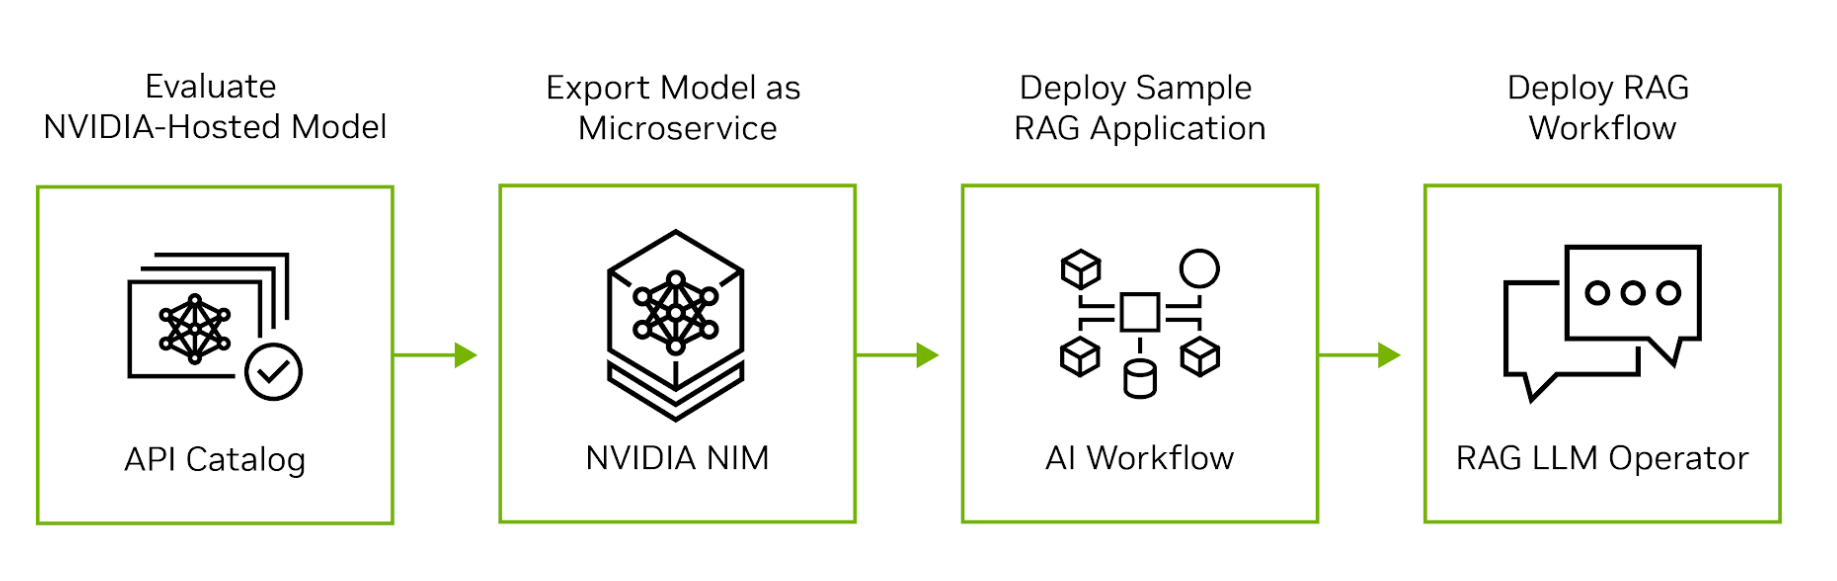 Diagram showing how a RAG application can move from pilot to production, starting with model evaluation in NVIDIA’s API catalog, exporting the model as a microservice, developing a sample application, and deploying to production.
